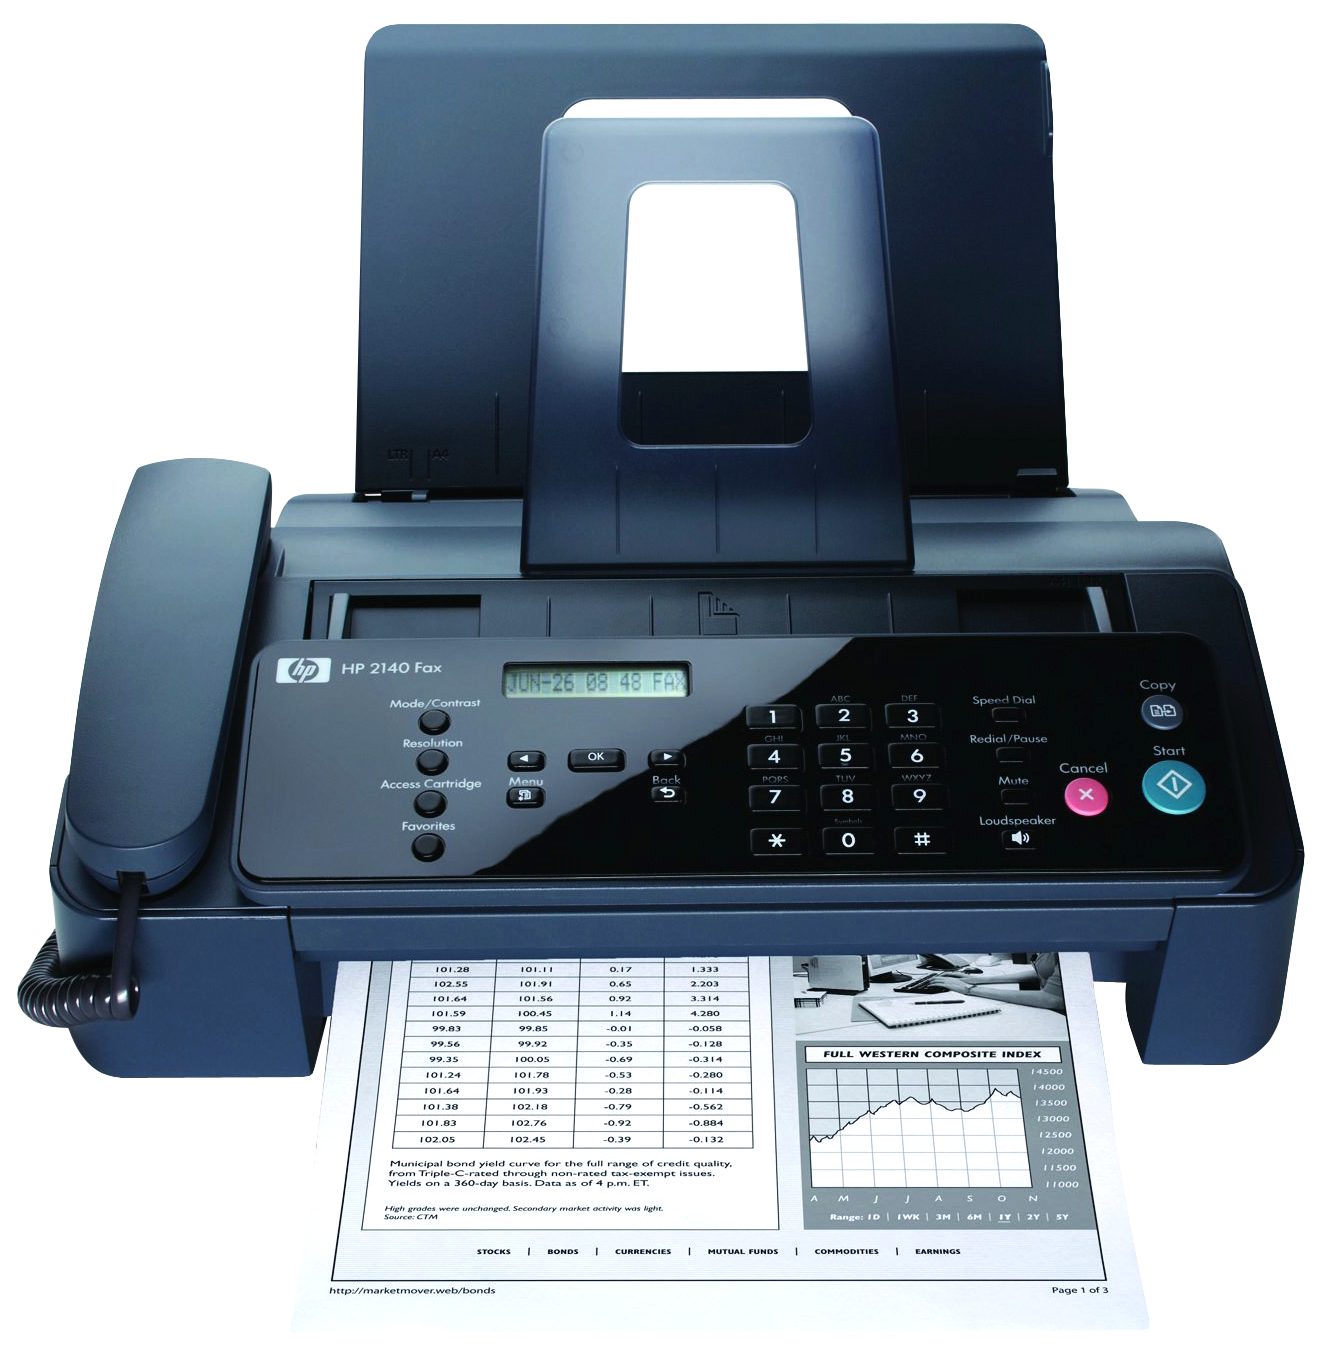 Download PNG image - Fax Machine Download PNG Image 